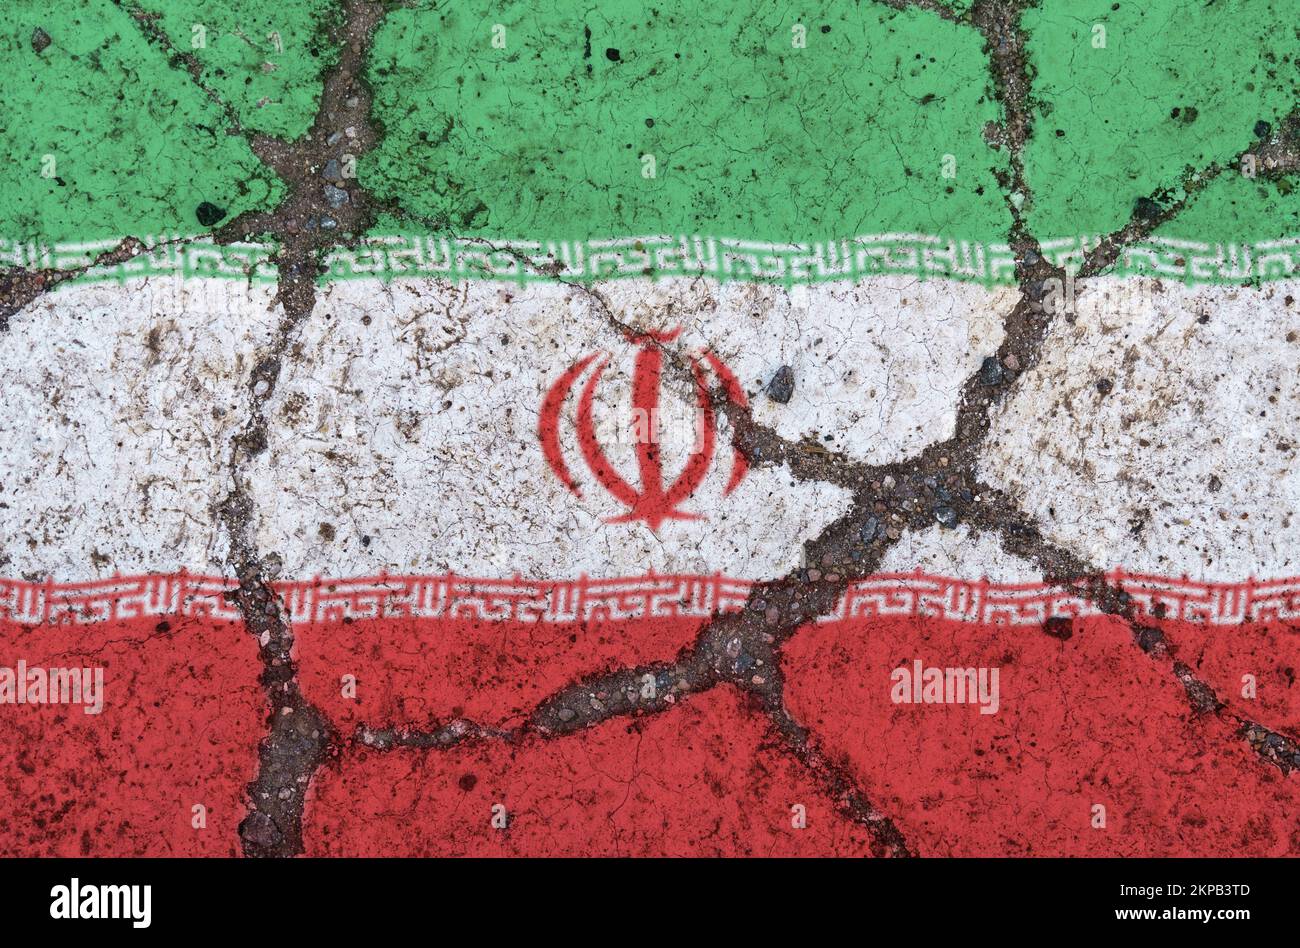 Iraqi flag on cracked asphalt. The concept of crisis, default, economic collapse, pandemic, conflict, terrorism in the country. Out of focus image Stock Photo